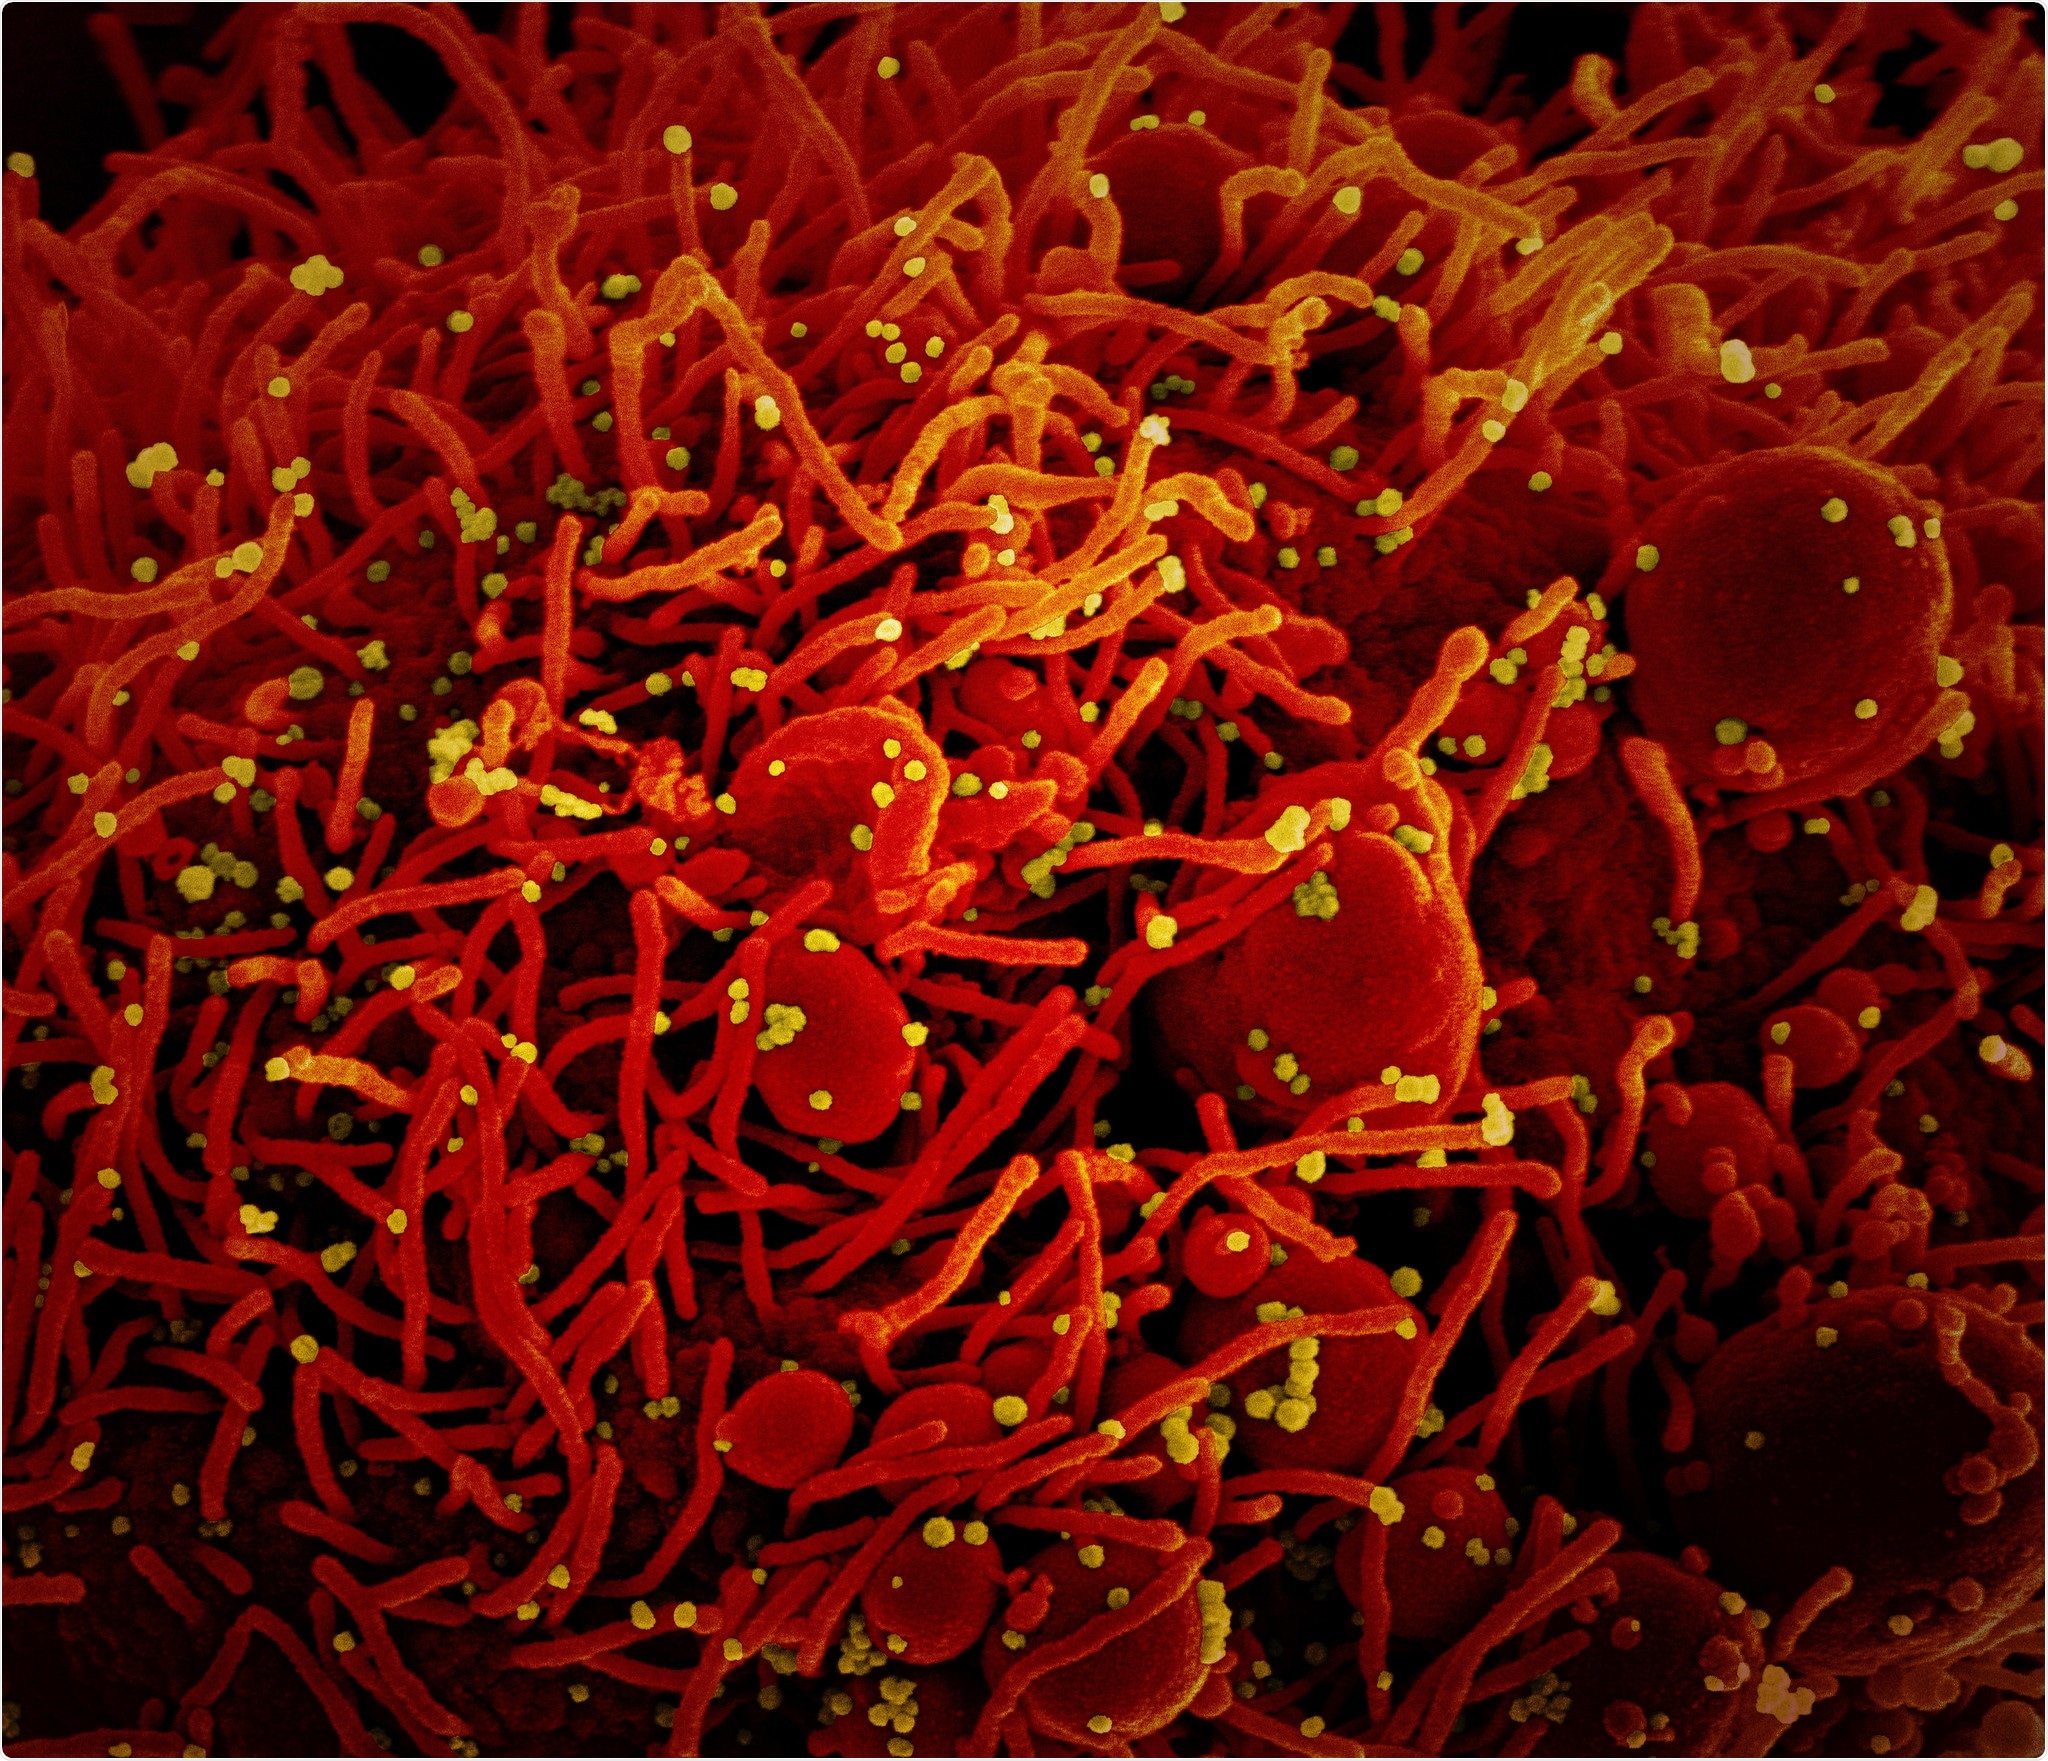 Novel Coronavirus SARS-CoV-2 Colorized scanning electron micrograph of an apoptotic cell (red) infected with SARS-COV-2 virus particles (yellow), isolated from a patient sample. Image captured at the NIAID Integrated Research Facility (IRF) in Fort Detrick, Maryland. Credit: NIAID